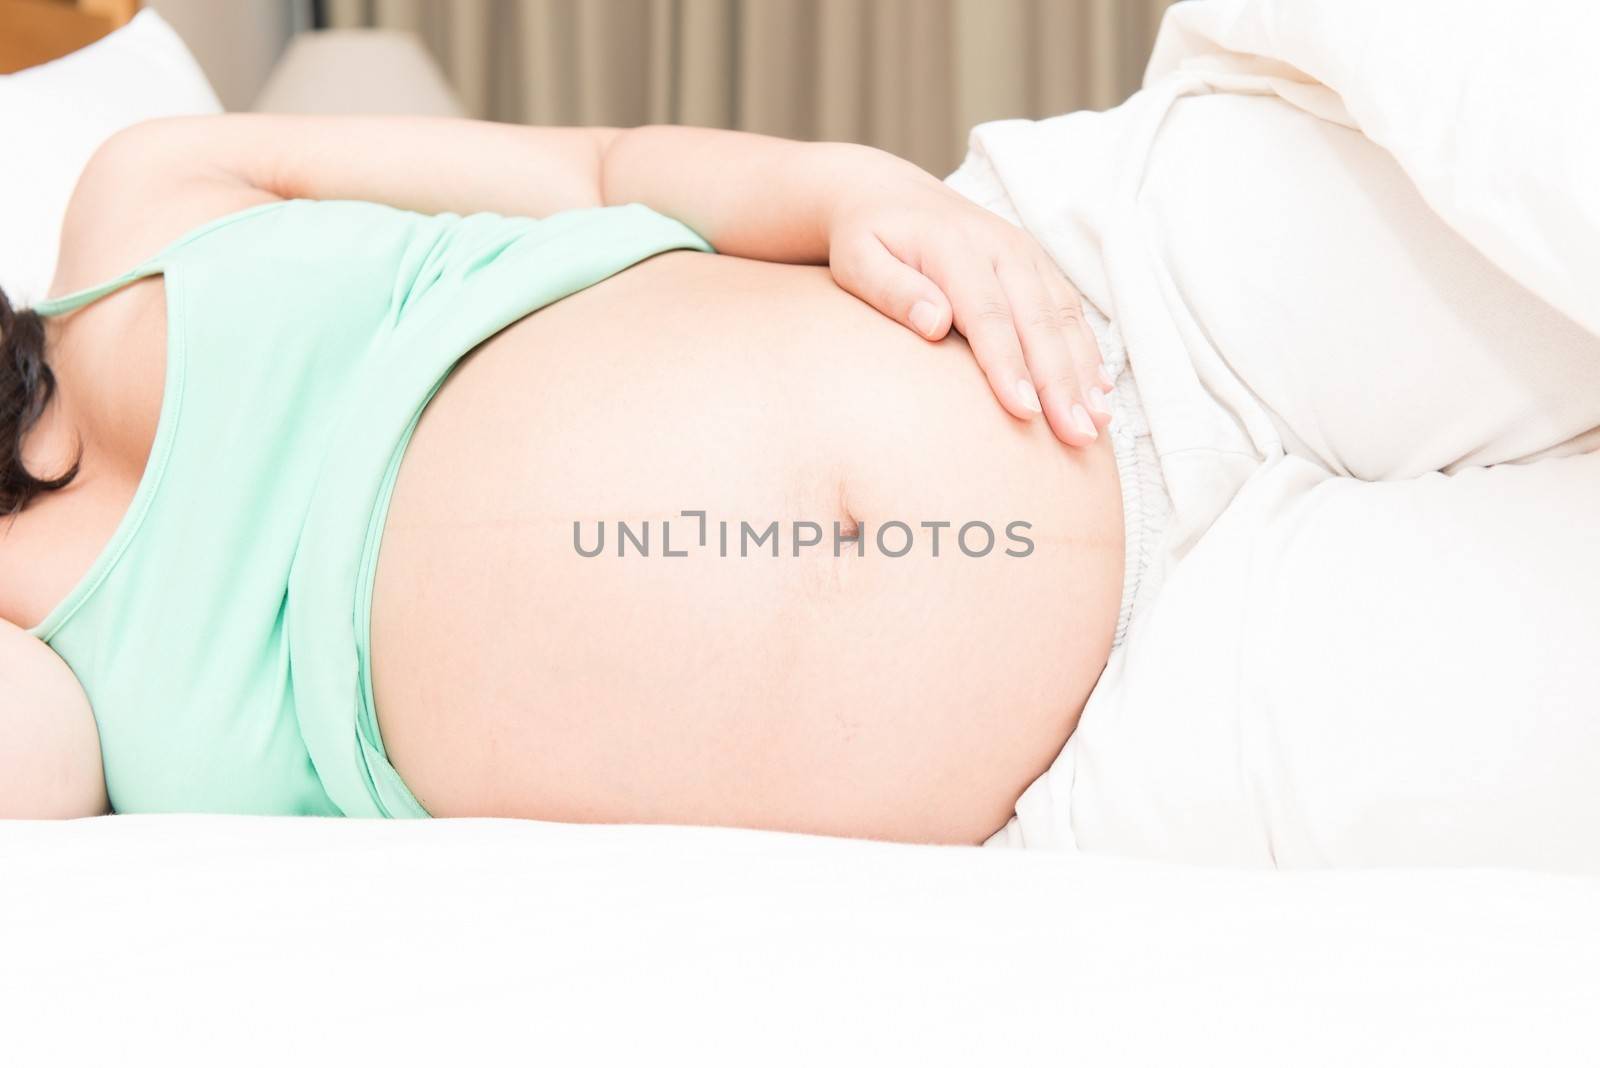 Young Thai pregnant woman sleeping in bed by sasilsolutions